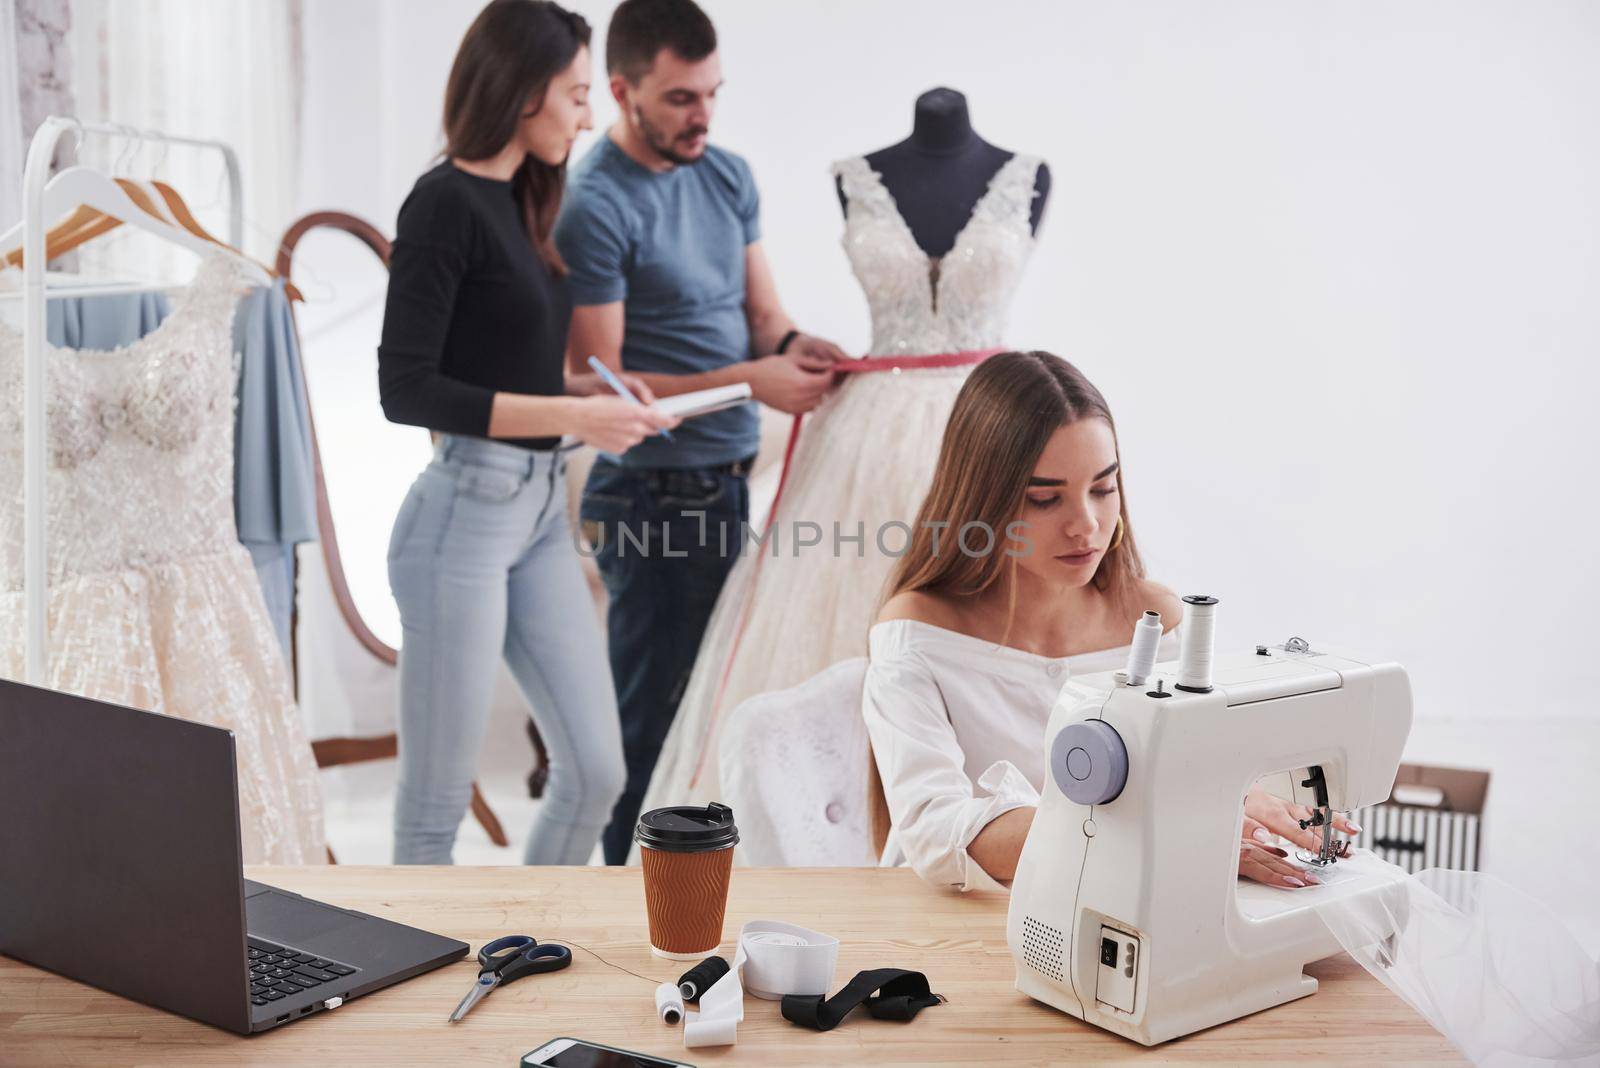 Girl and man measures dress. Female fashion designer works on the new clothes in the workshop with group of people behind by Standret